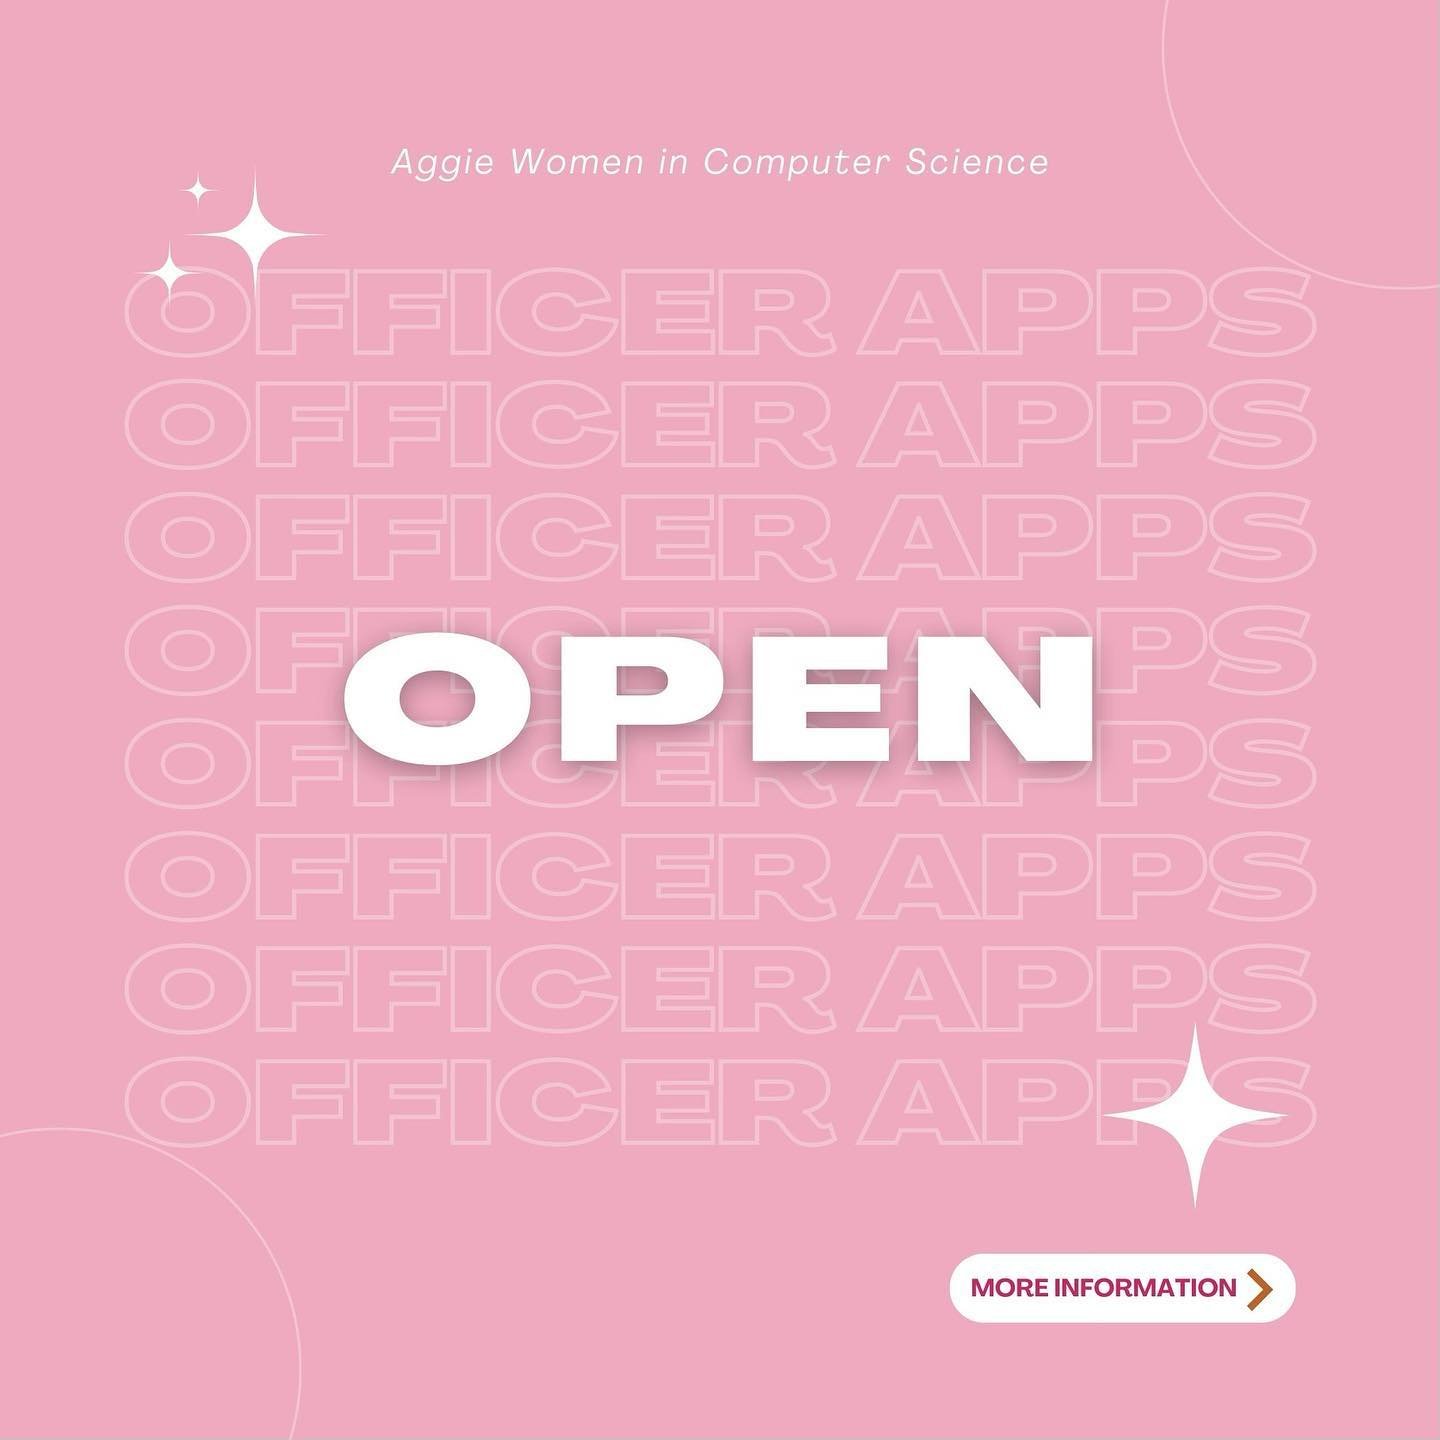 🚨OFFICER APPS ARE OPEN🚨

We now have two officer positions open: External Socials Officer and Marketing Officer.

More information about both positions can be found in the application form located in the &ldquo;Officer Apps&rdquo; story highlight. 